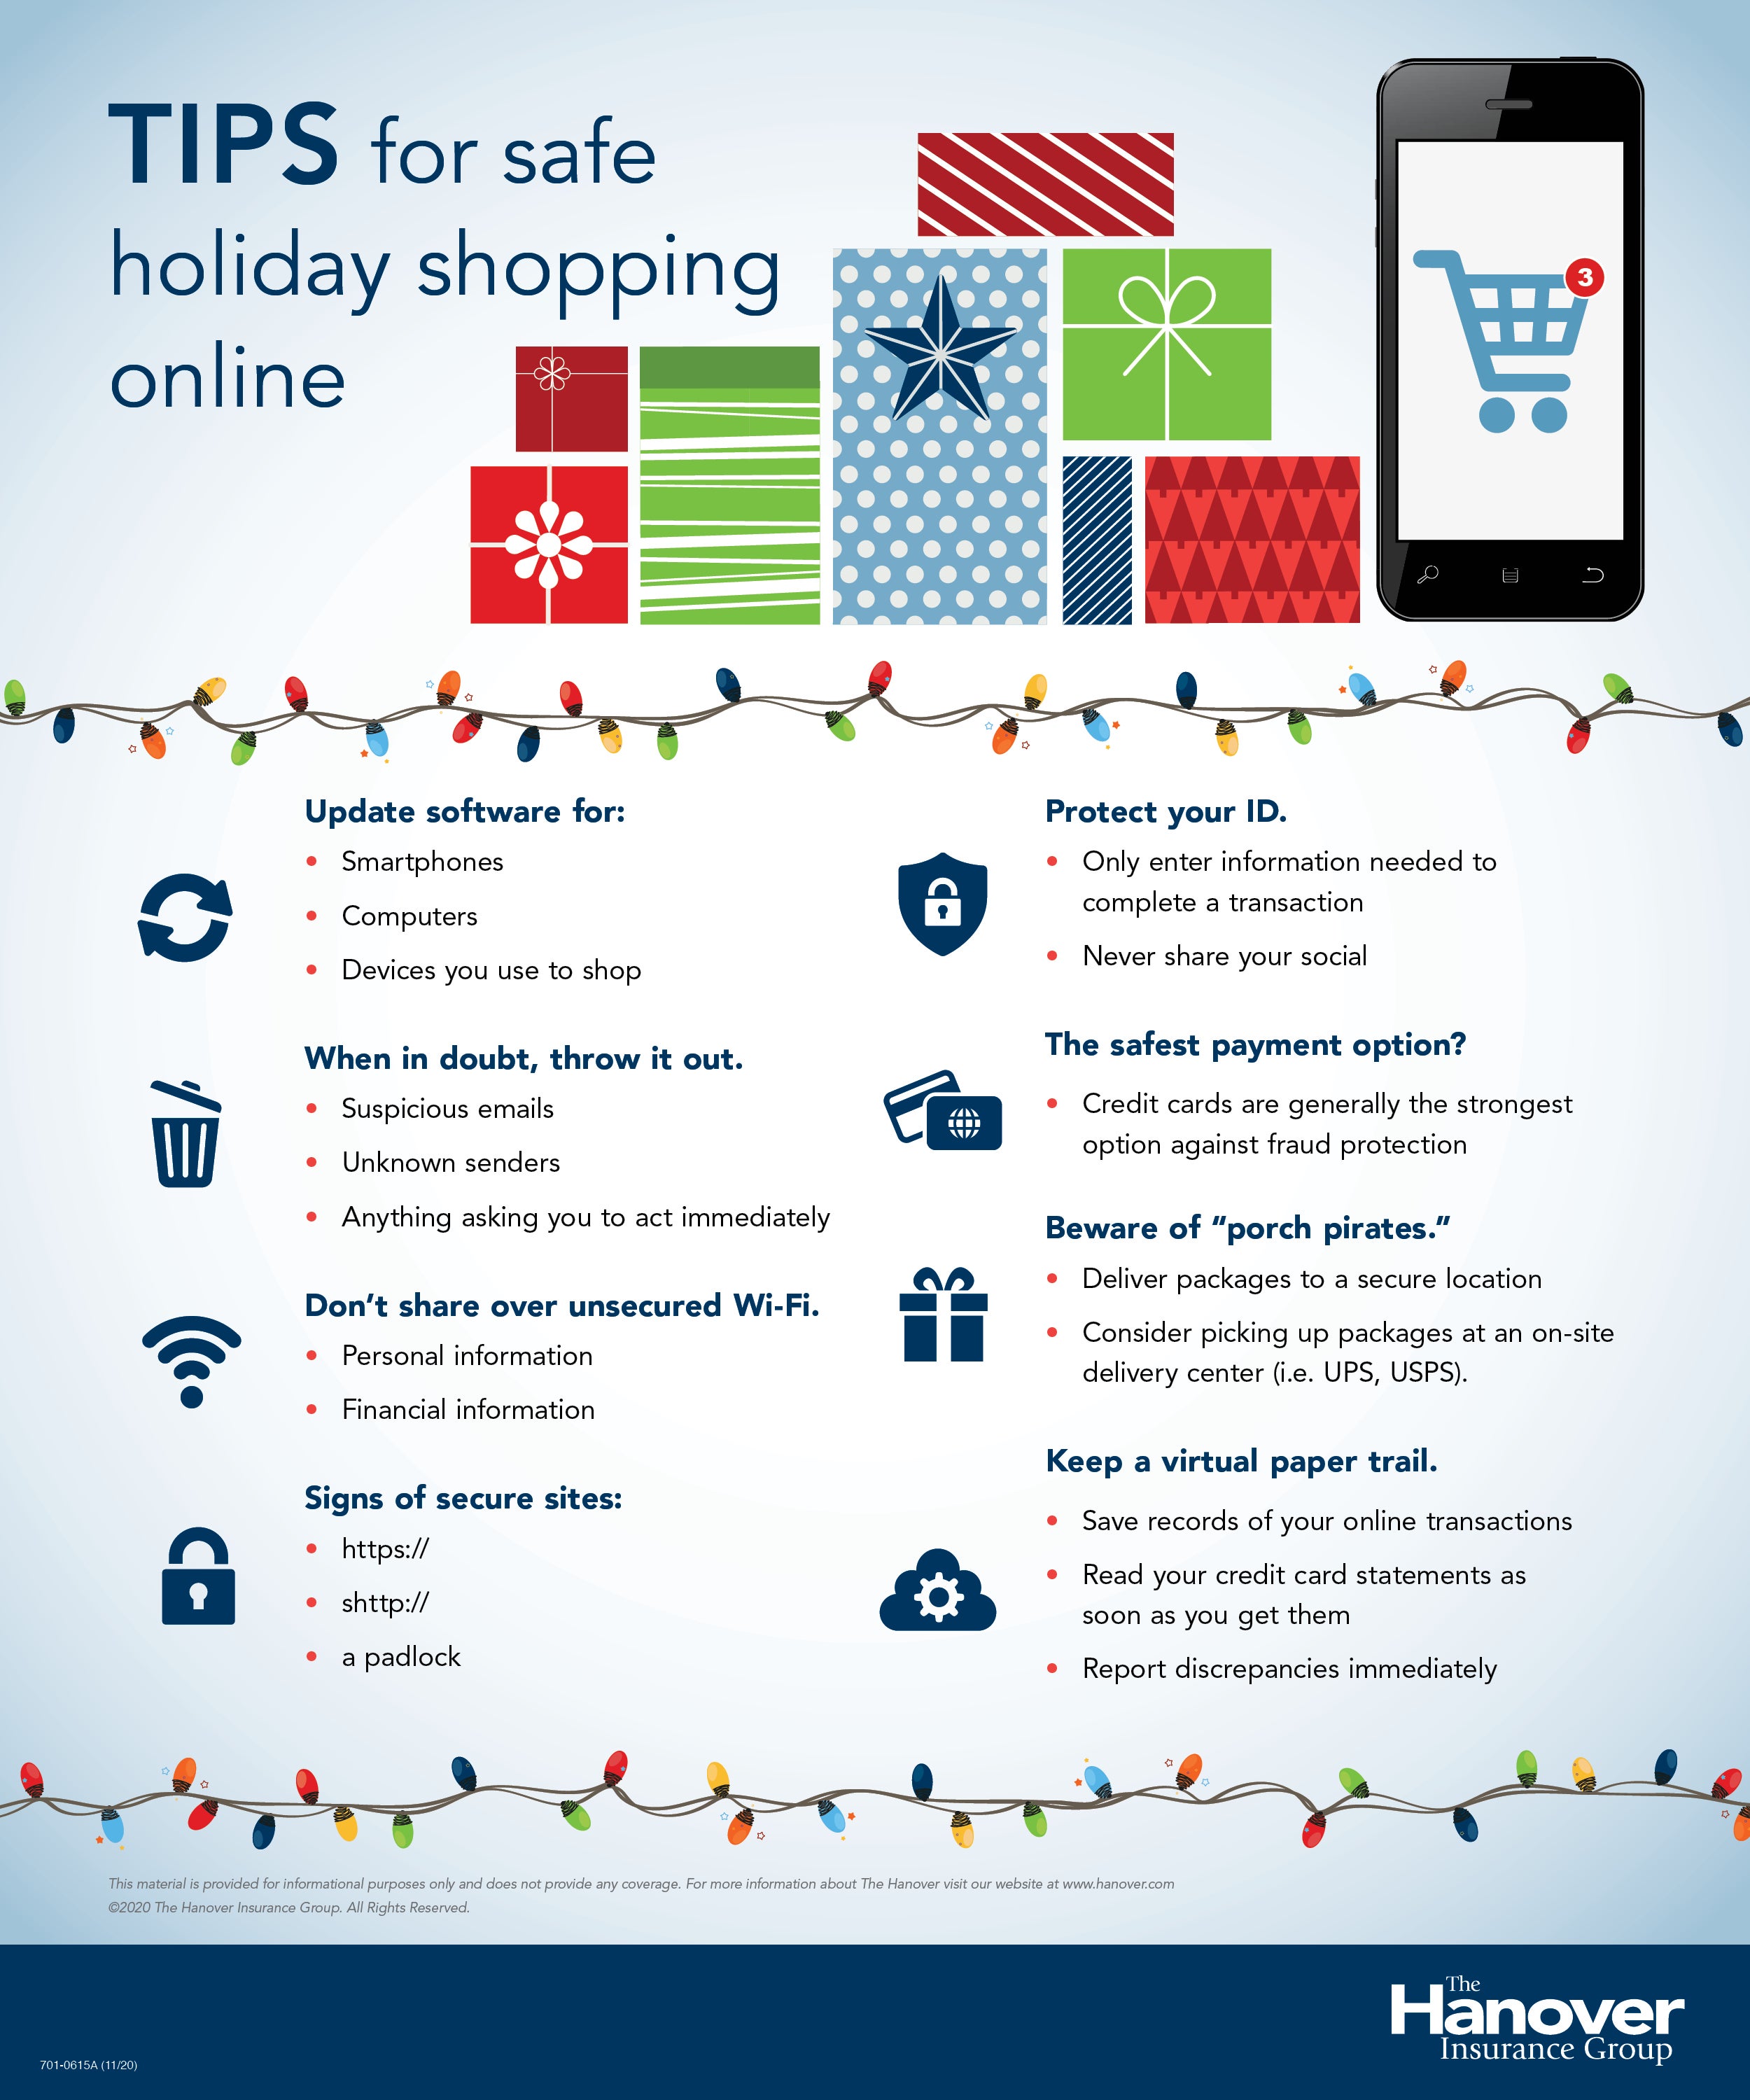 infographic sharing tips for safe holiday shopping online